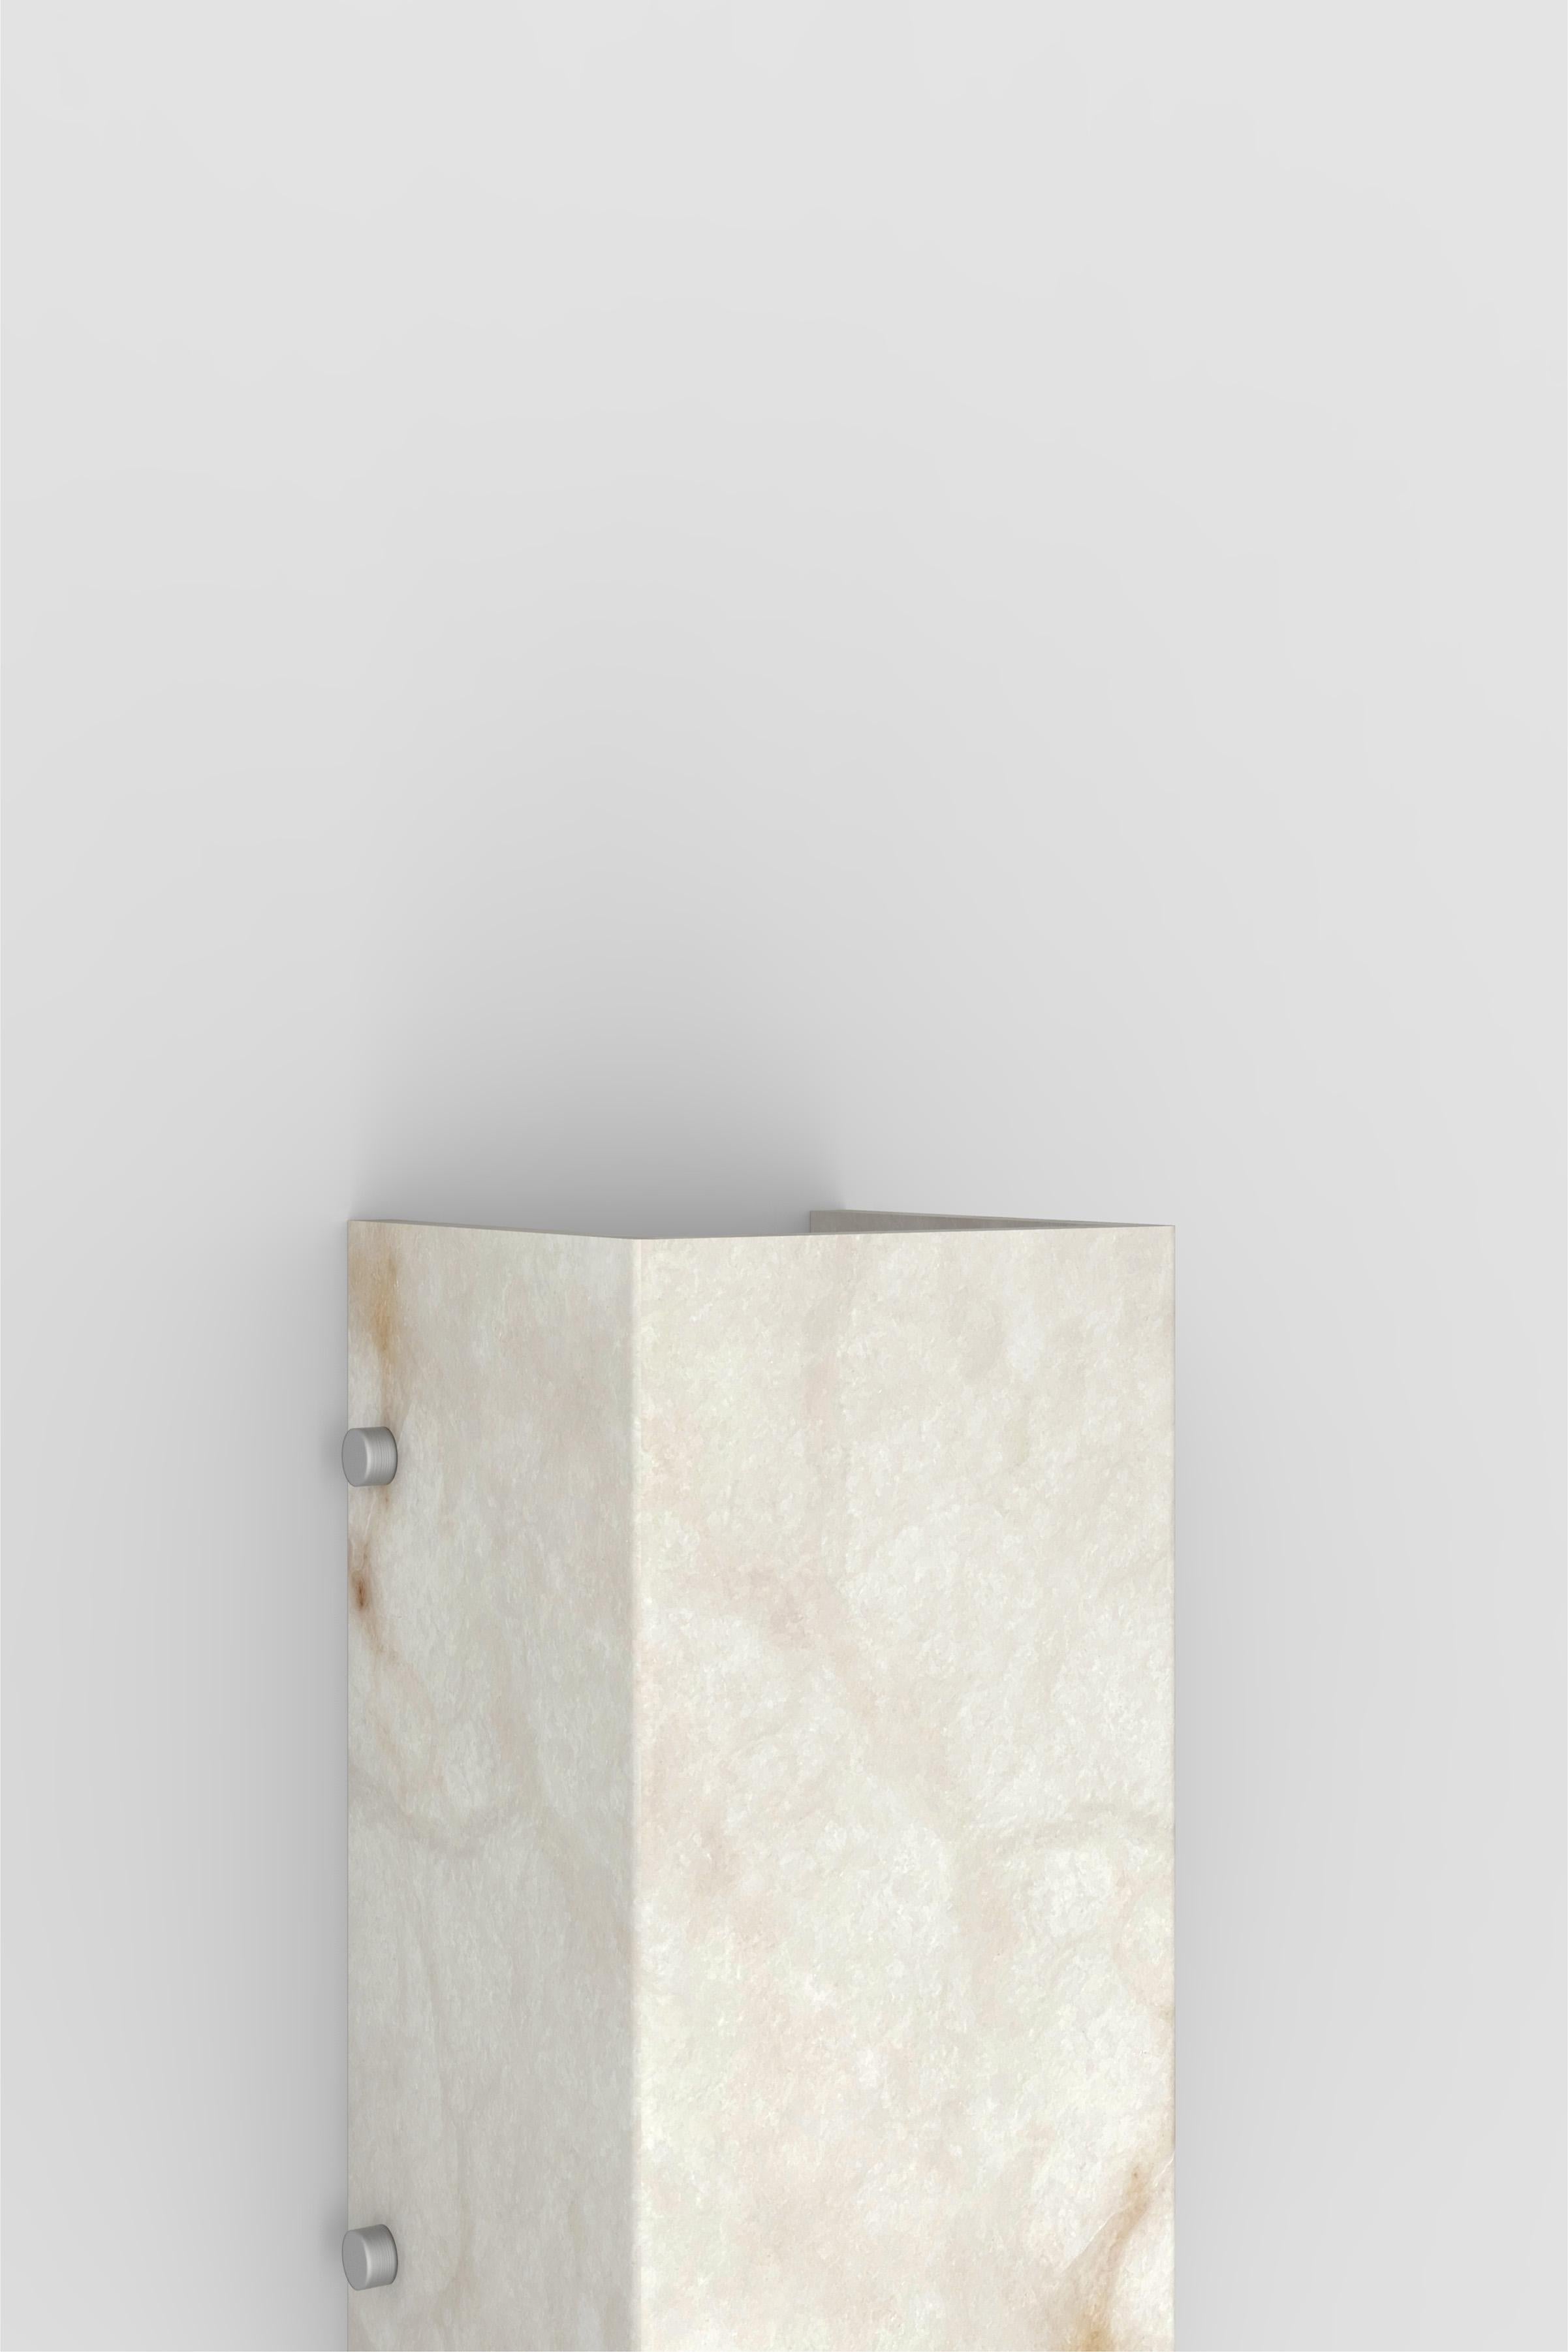 Blackened Contemporary Ponti Half Sconce 003A in Alabaster Orphan Work For Sale